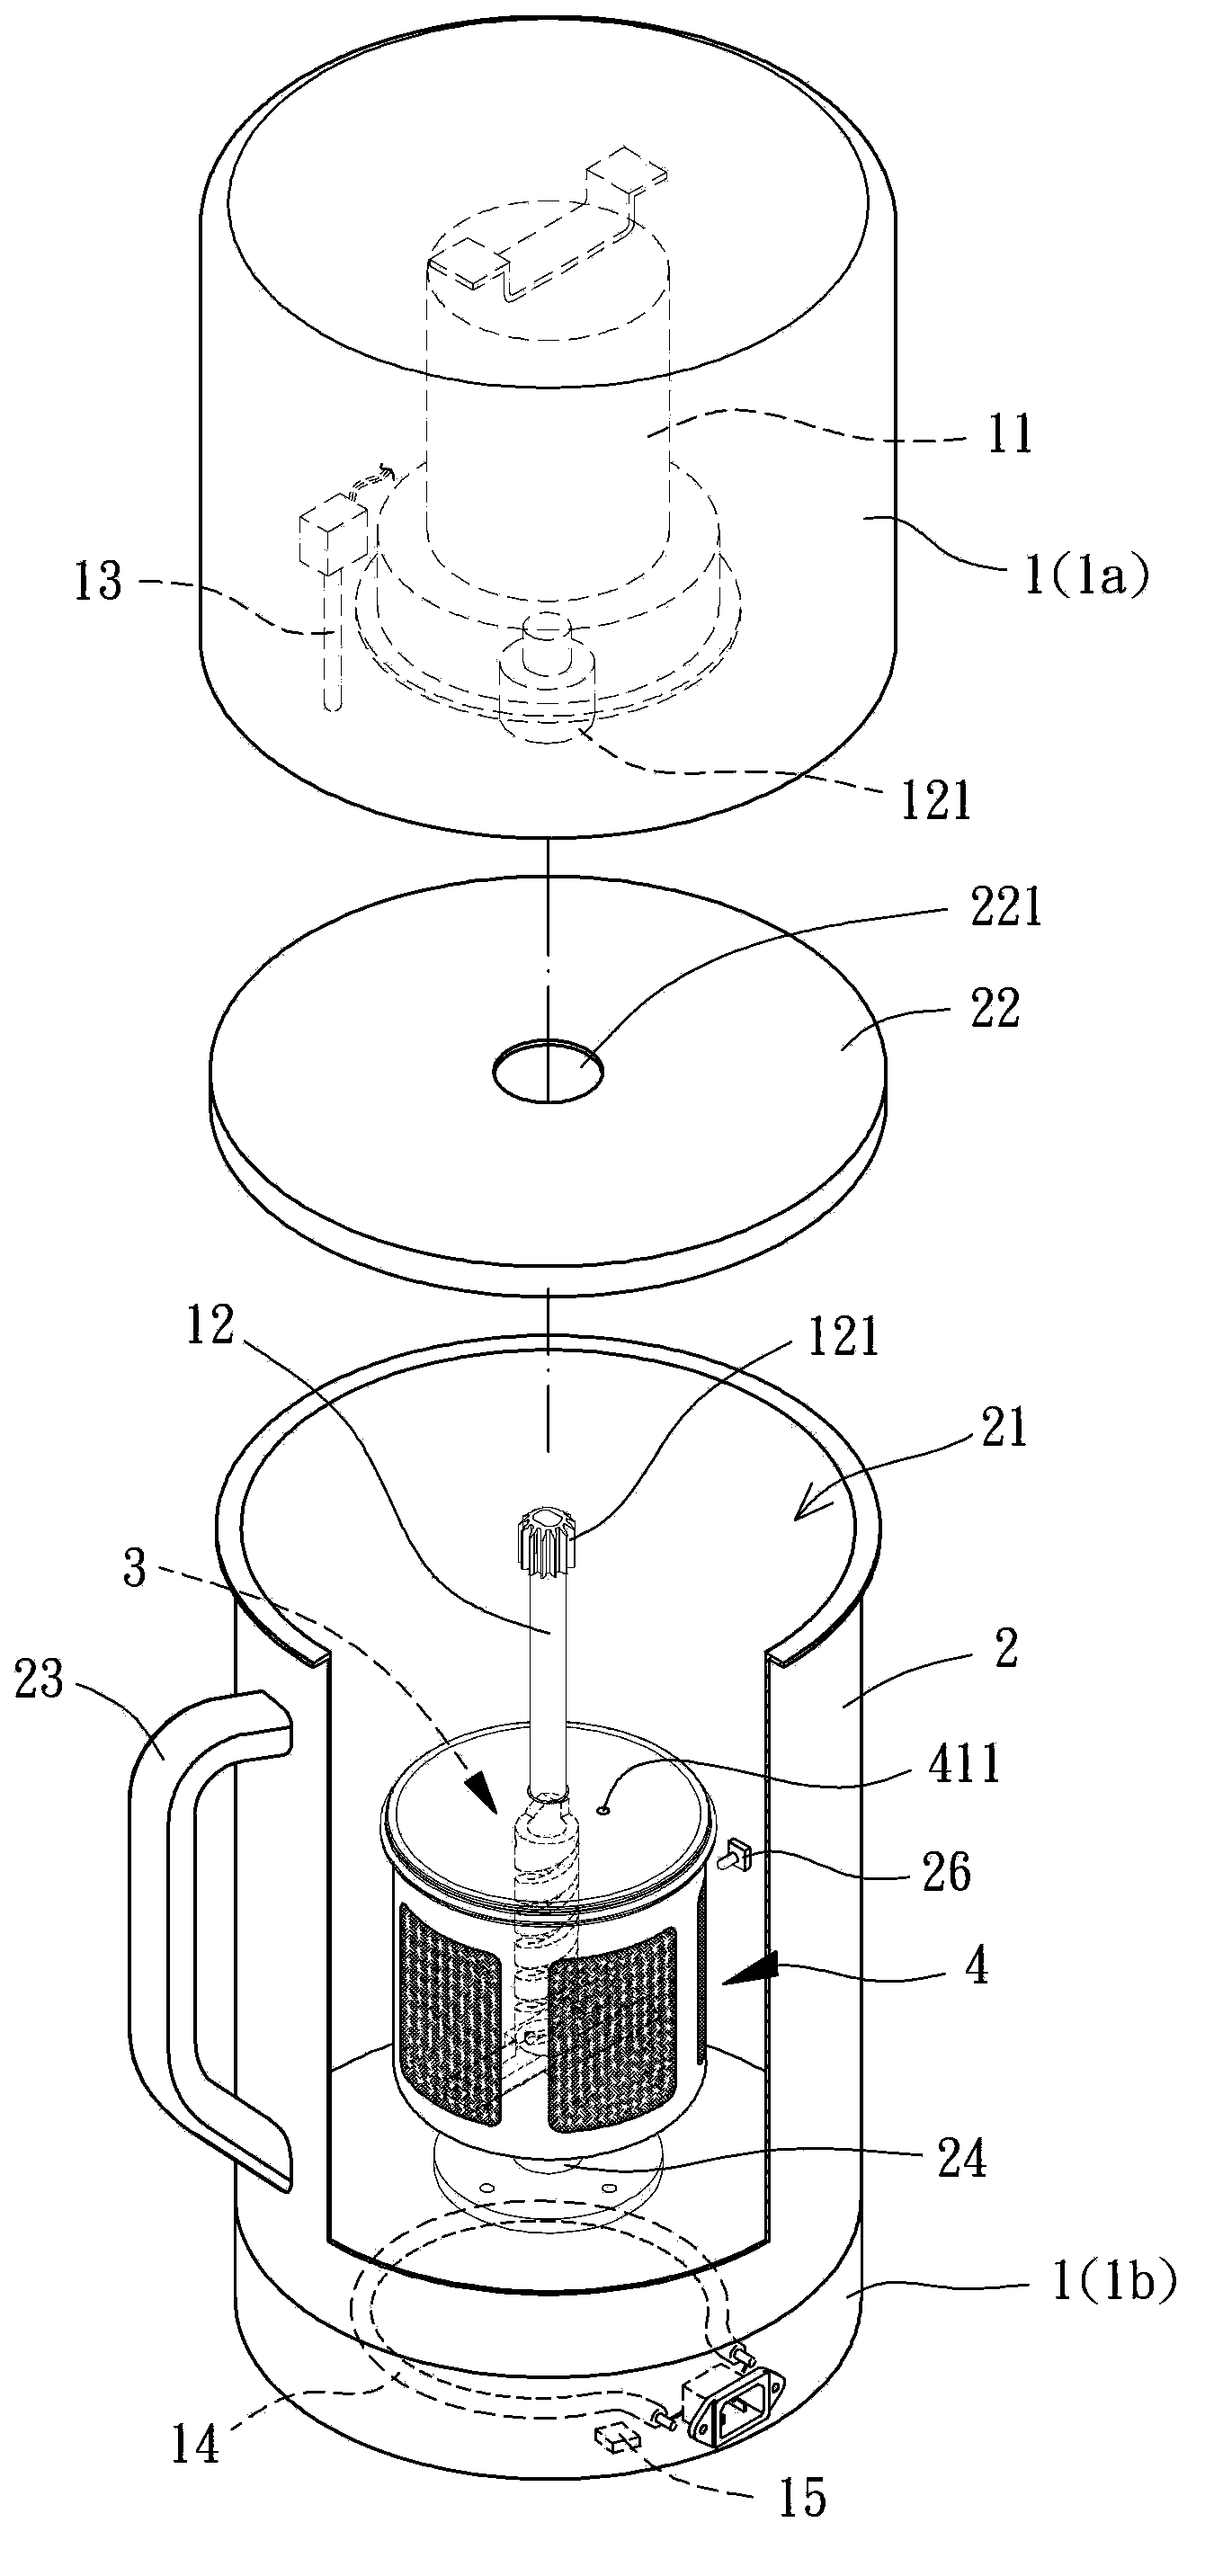 Residue and juice separating device